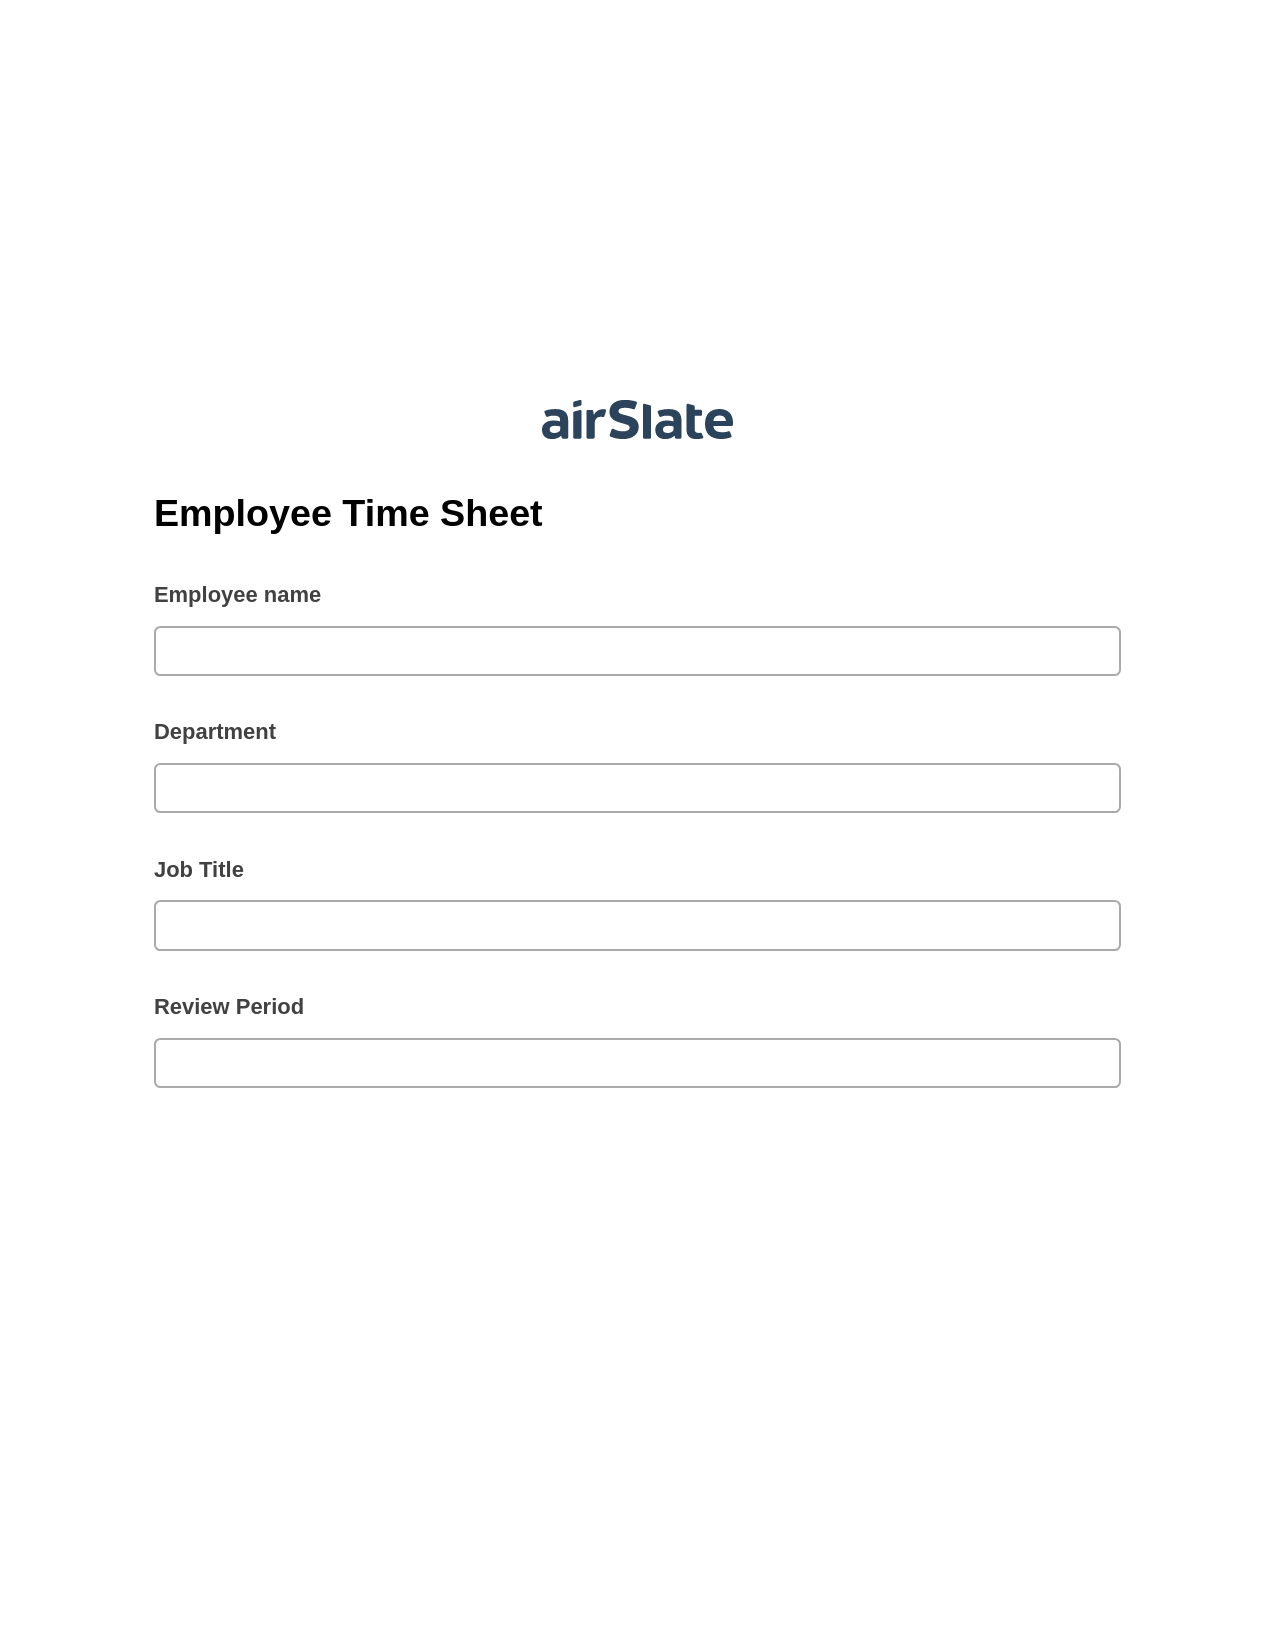 Employee Time Sheet Pre-fill from Google Sheets Bot, Create slate addon, Archive to Box Bot